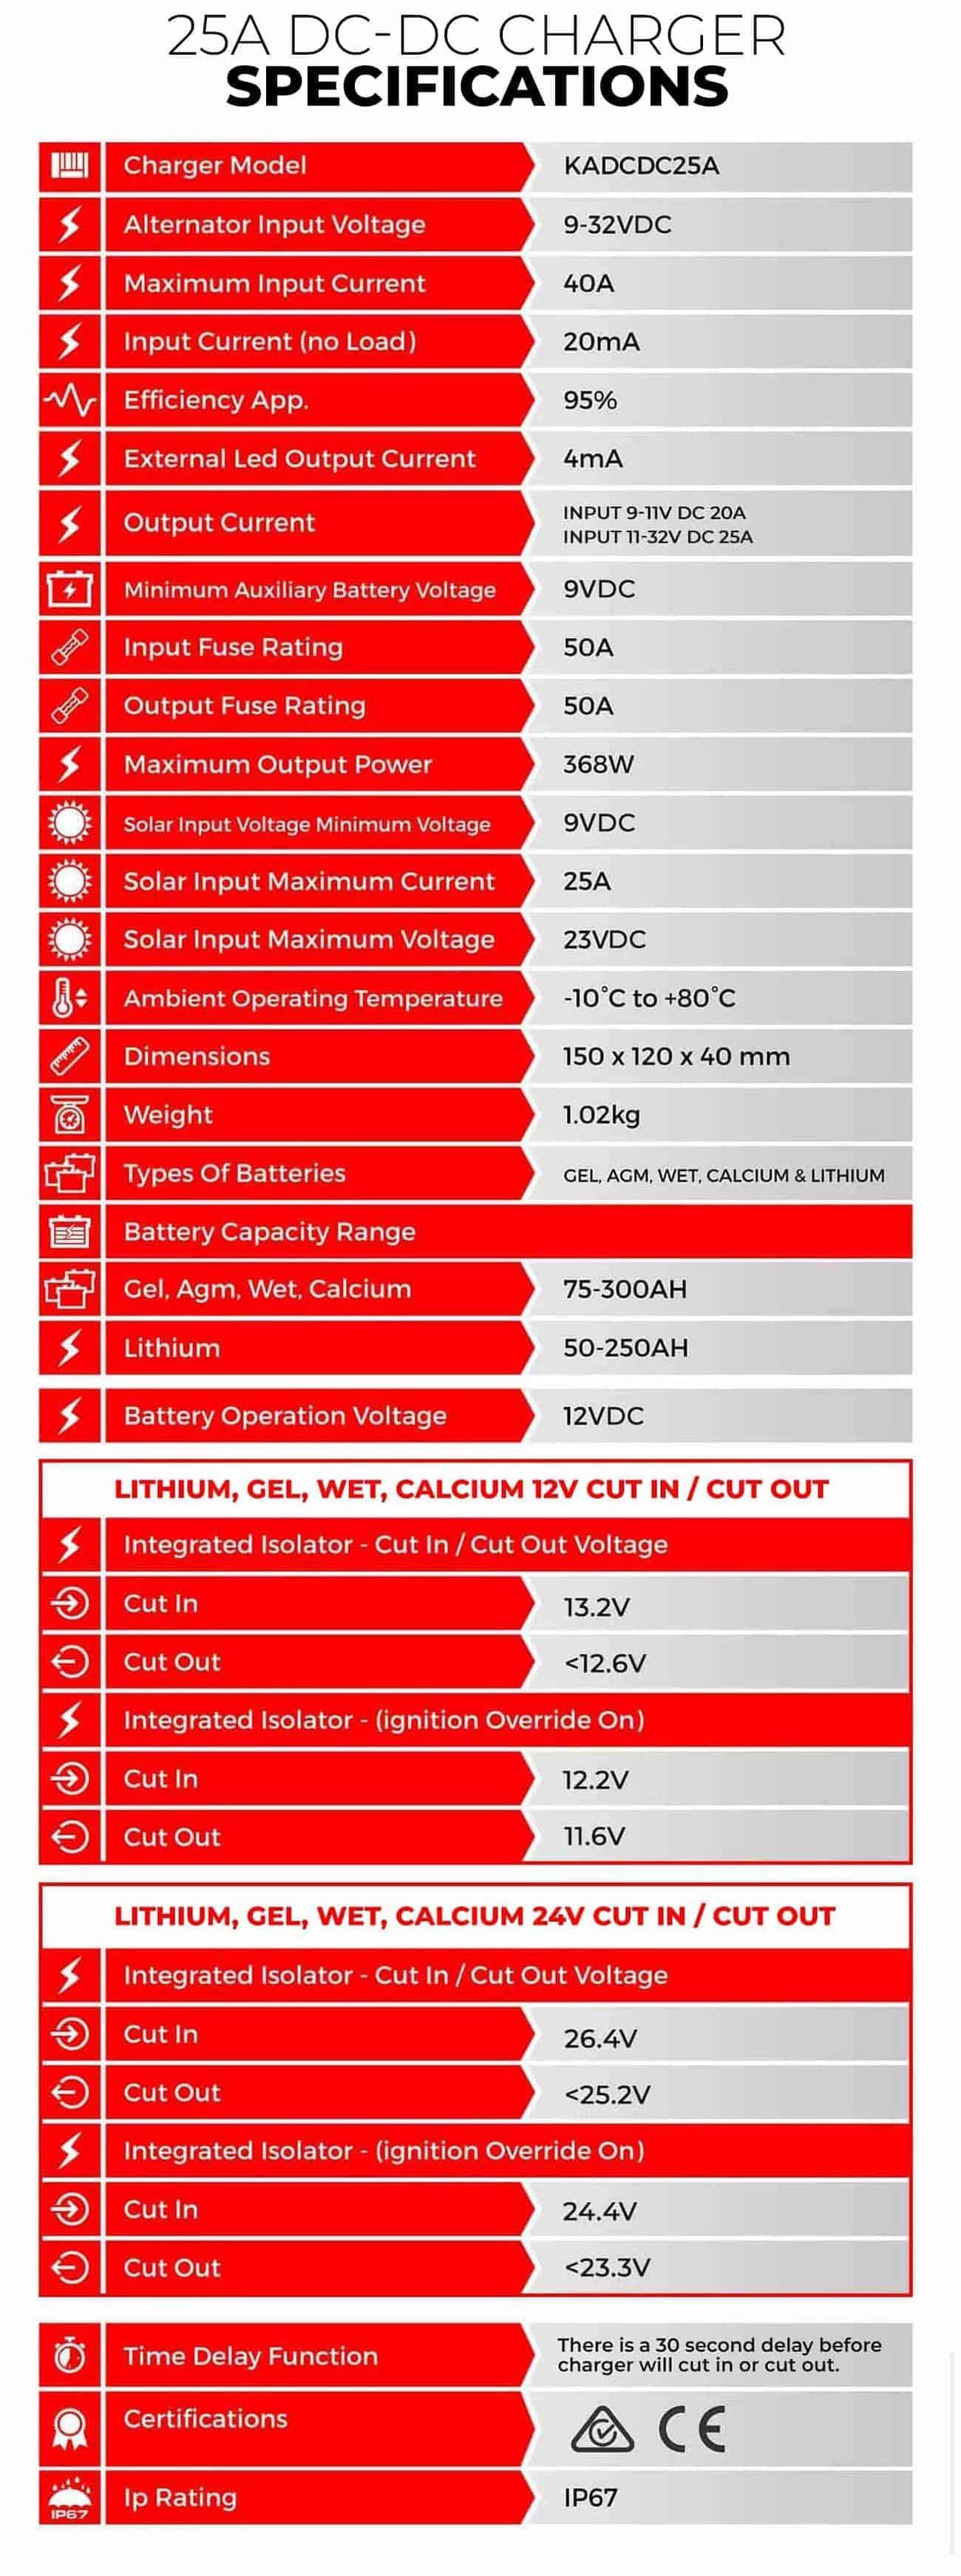 25A DC-DC Charger Specifications